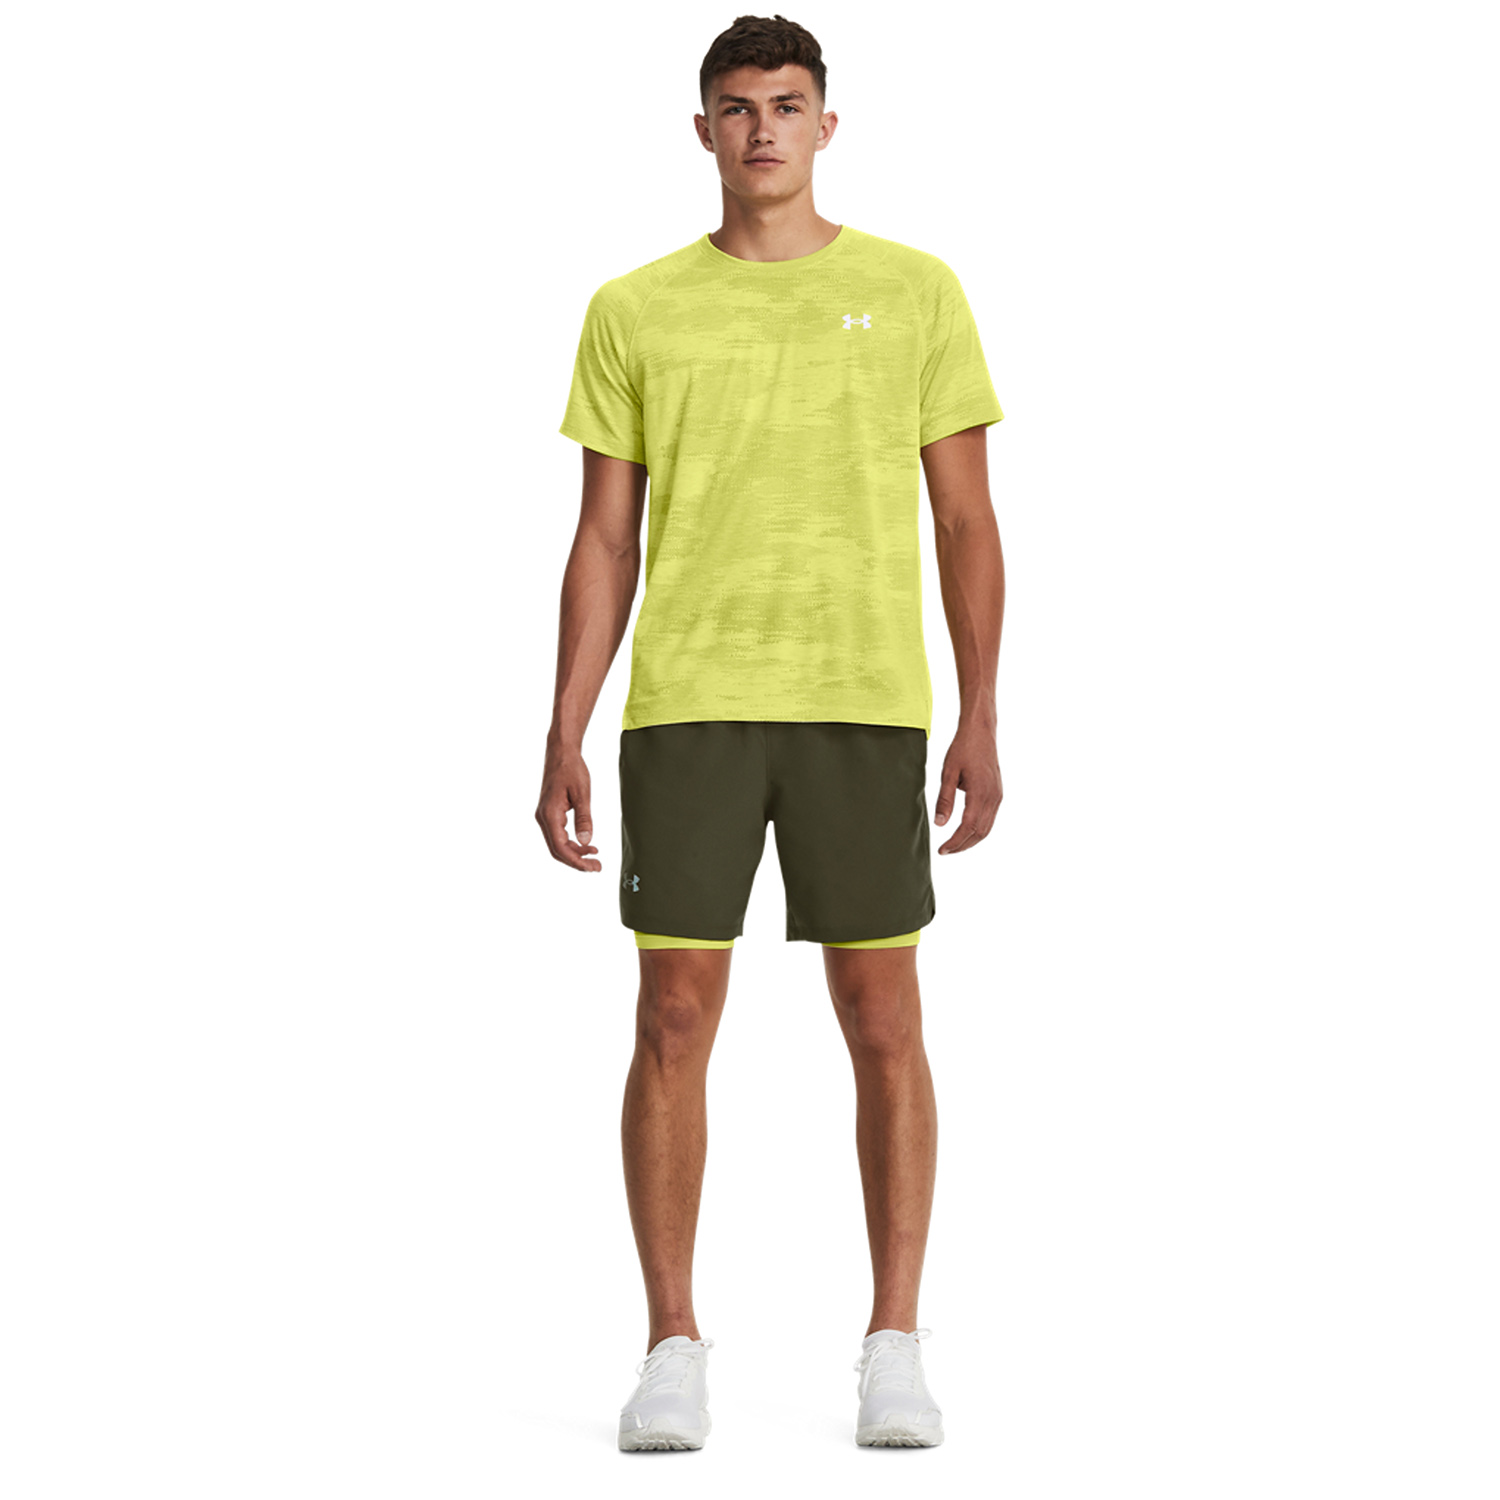 Under Armour Launch 2 in 1 7in Shorts - Marine Od Green/Black